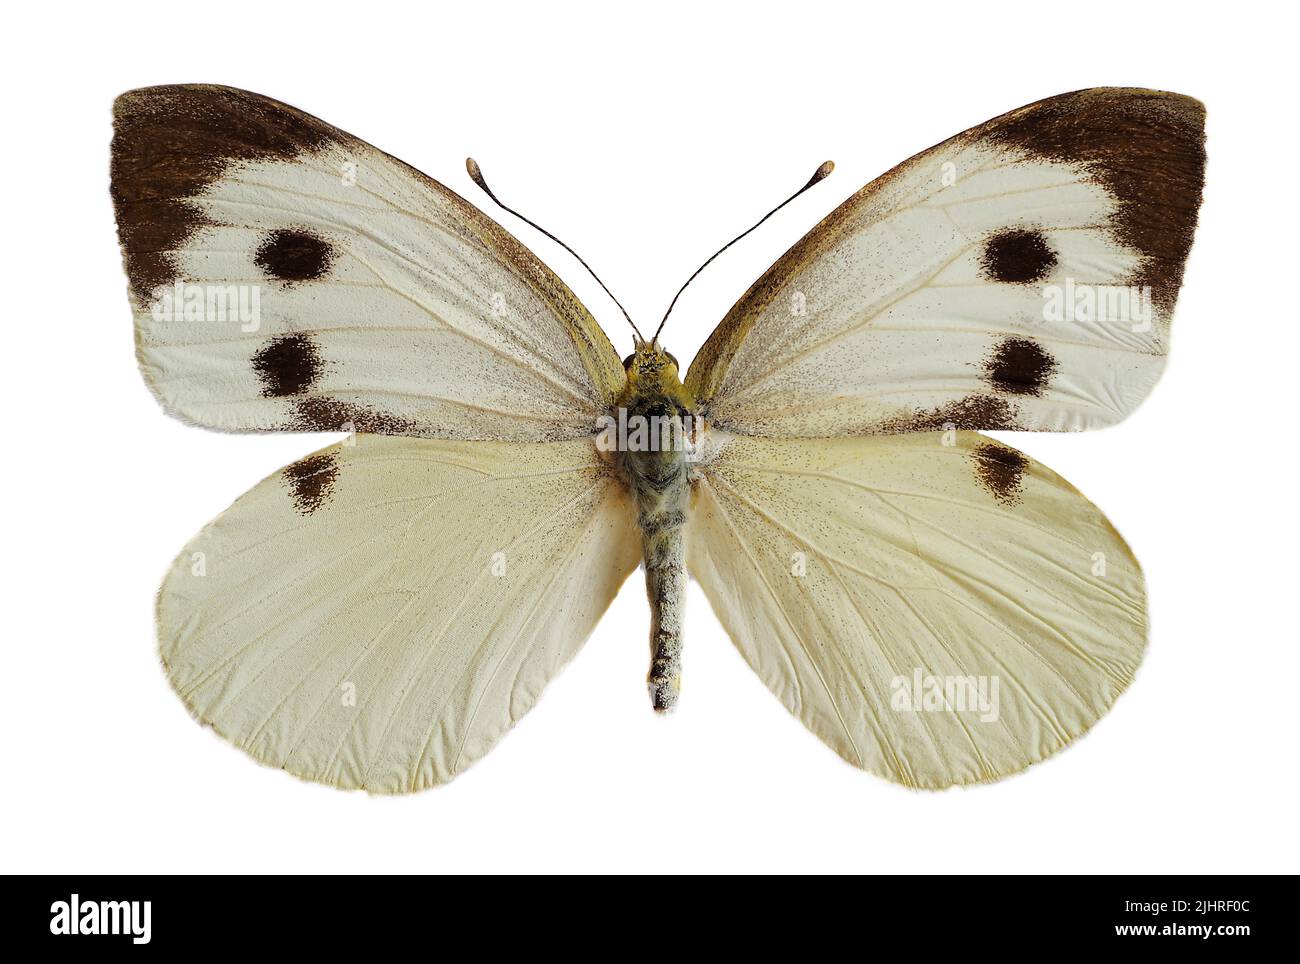 Female large white butterfly, also called Cabbage Butterfly or Cabbage White (Pieris brassicae), open wings isolated on white background Stock Photo